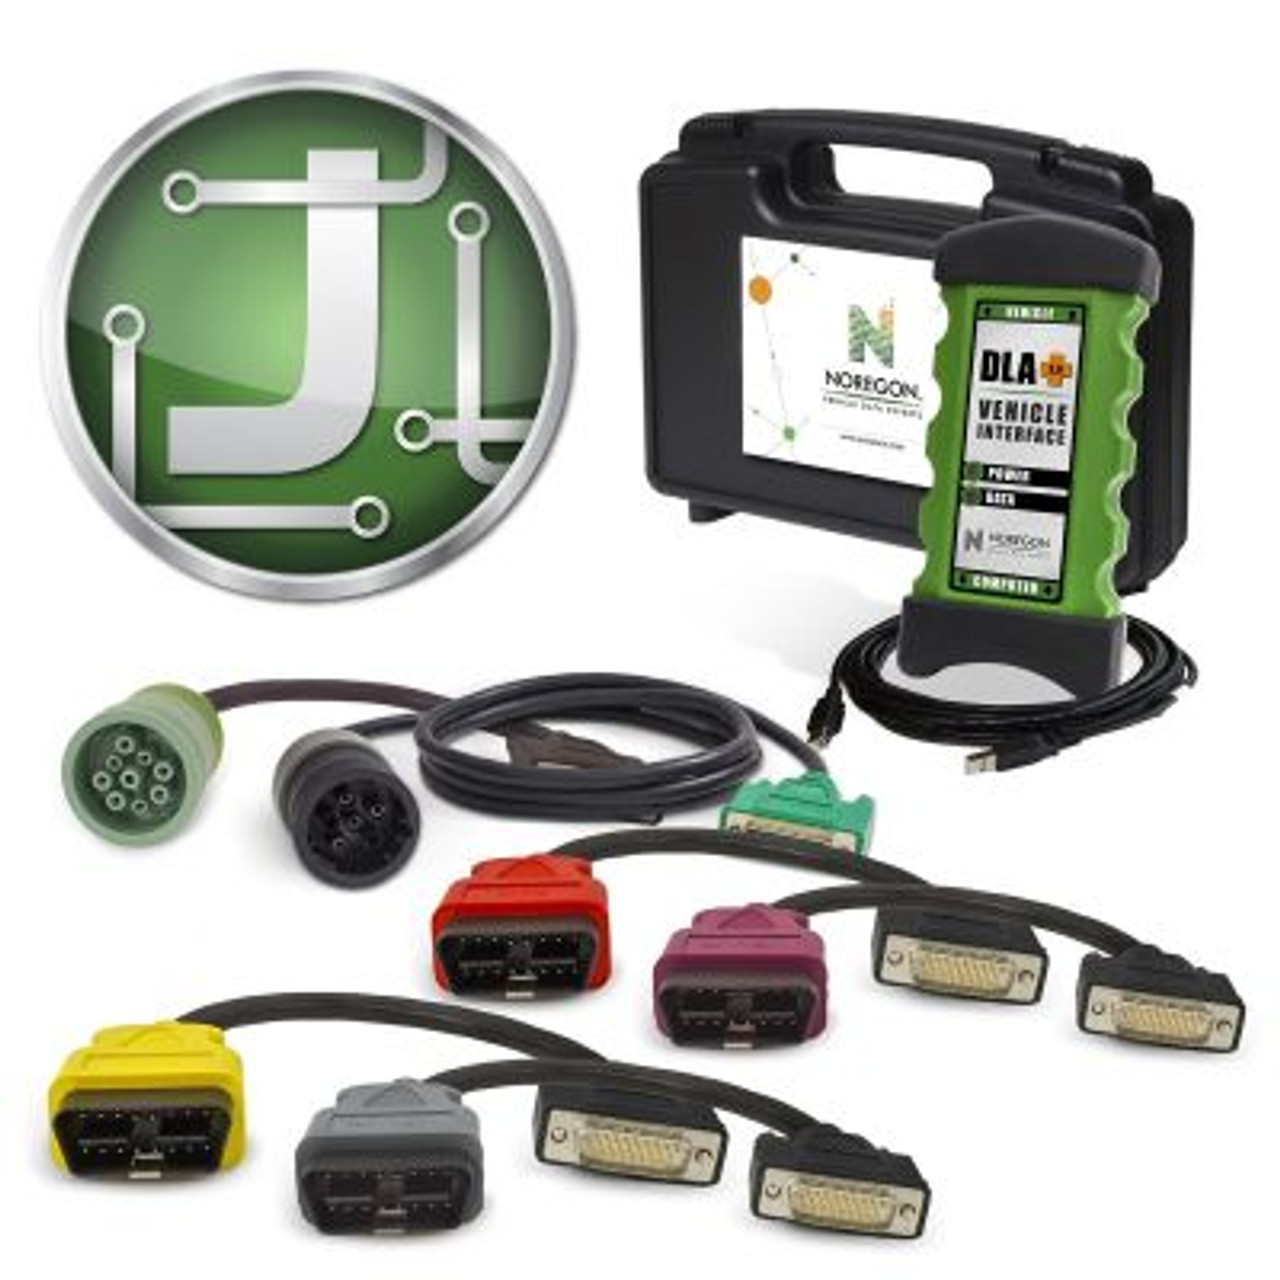 JPRO Professional Diagnostic Software and Adapter Kit